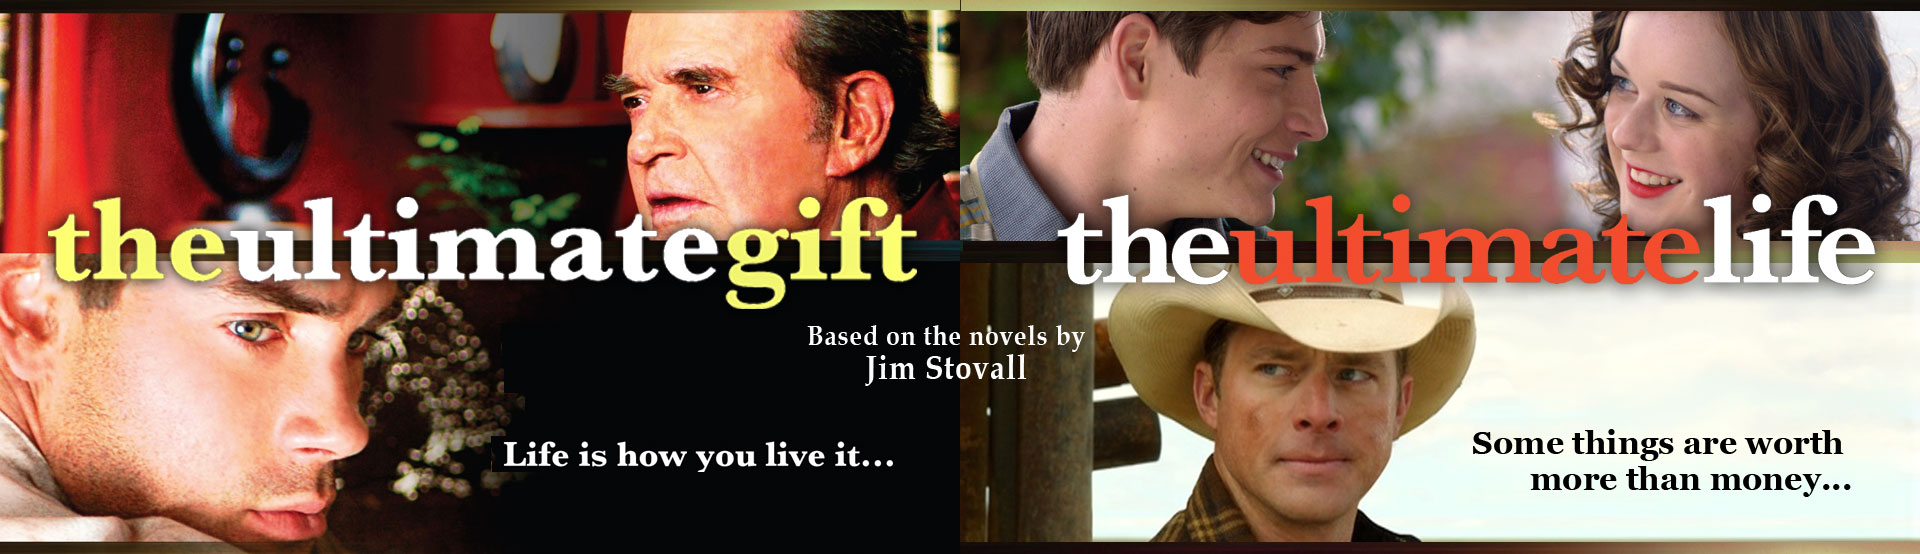 The Ultimate Gift/The Ultimate Life